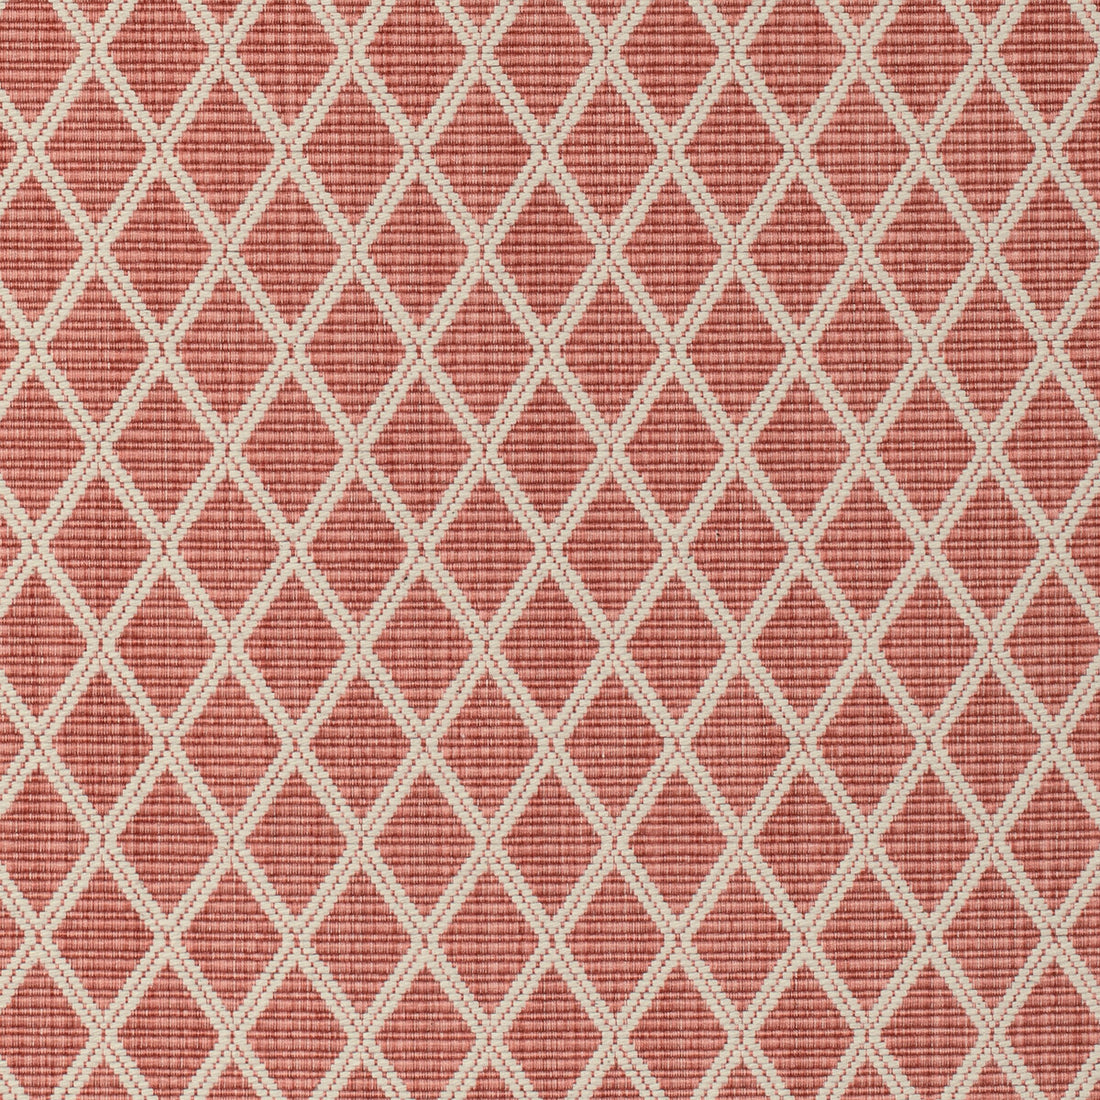 Cancale Woven fabric in berry color - pattern 8020109.77.0 - by Brunschwig &amp; Fils in the Granville Weaves collection